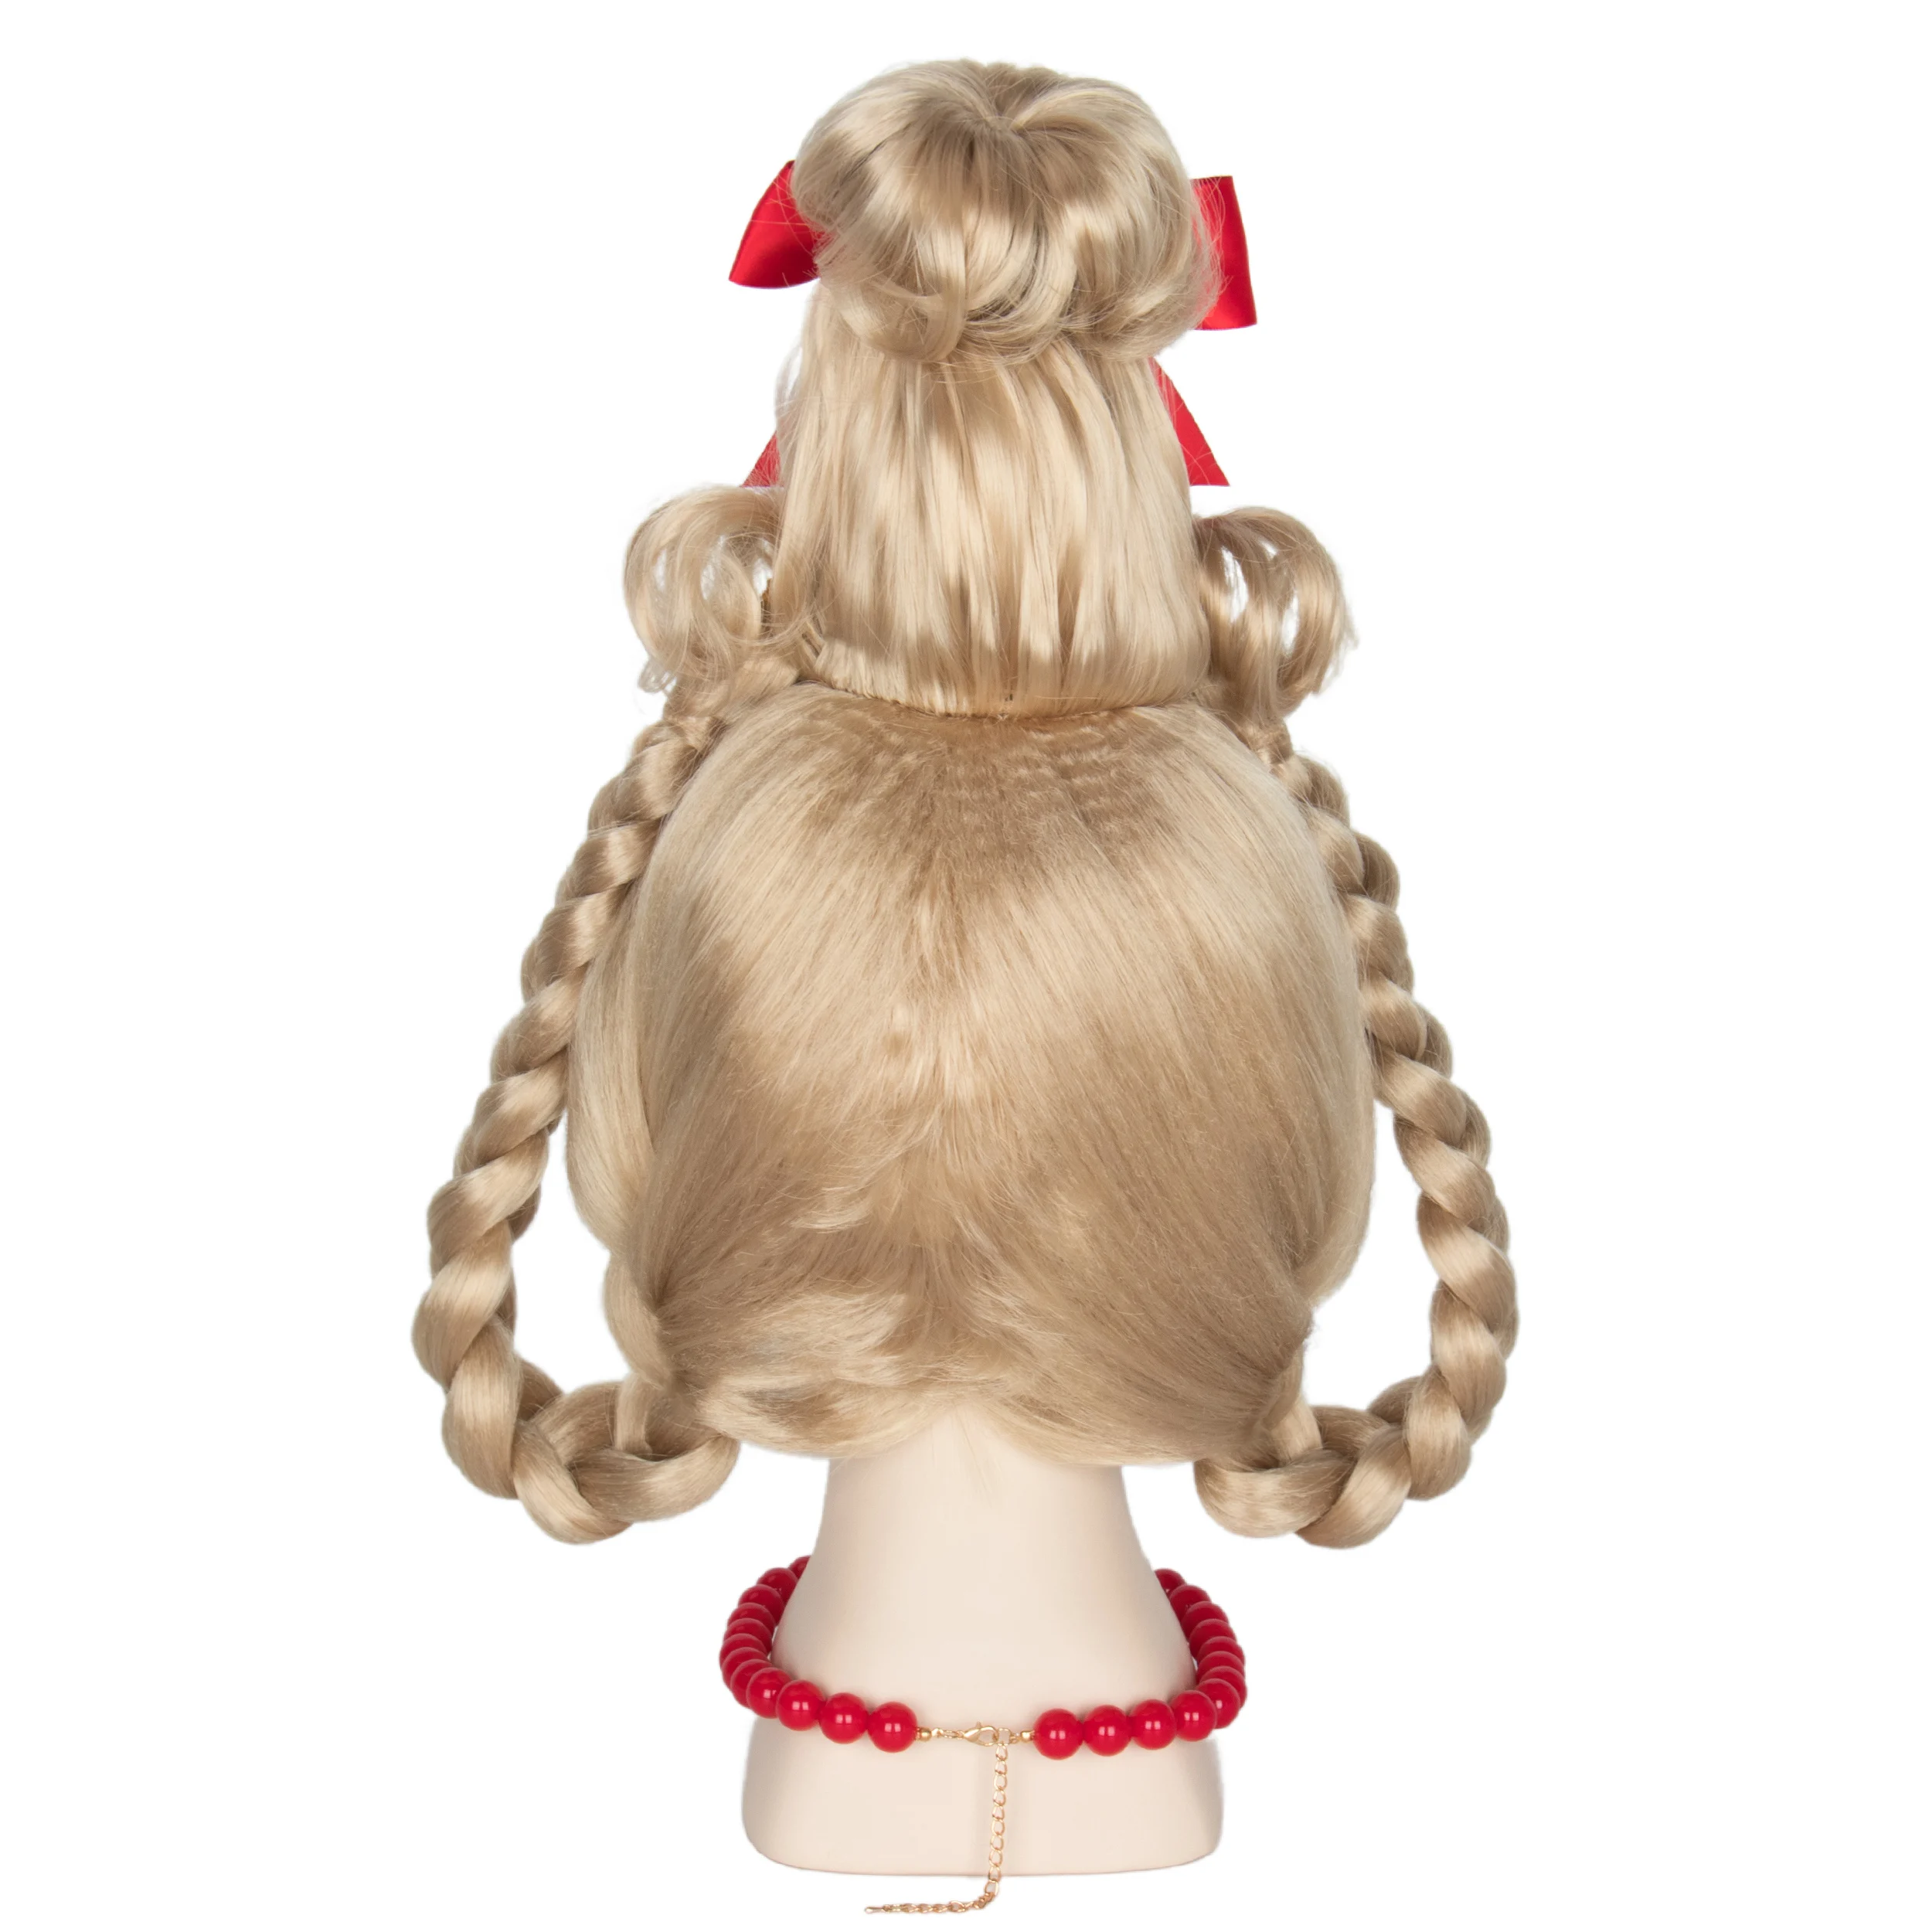 Miss U Hair Christmas Girl Wigs Long Blonde Braid Who Wig for Kids Children with Red Necklace and Ribbon Bow